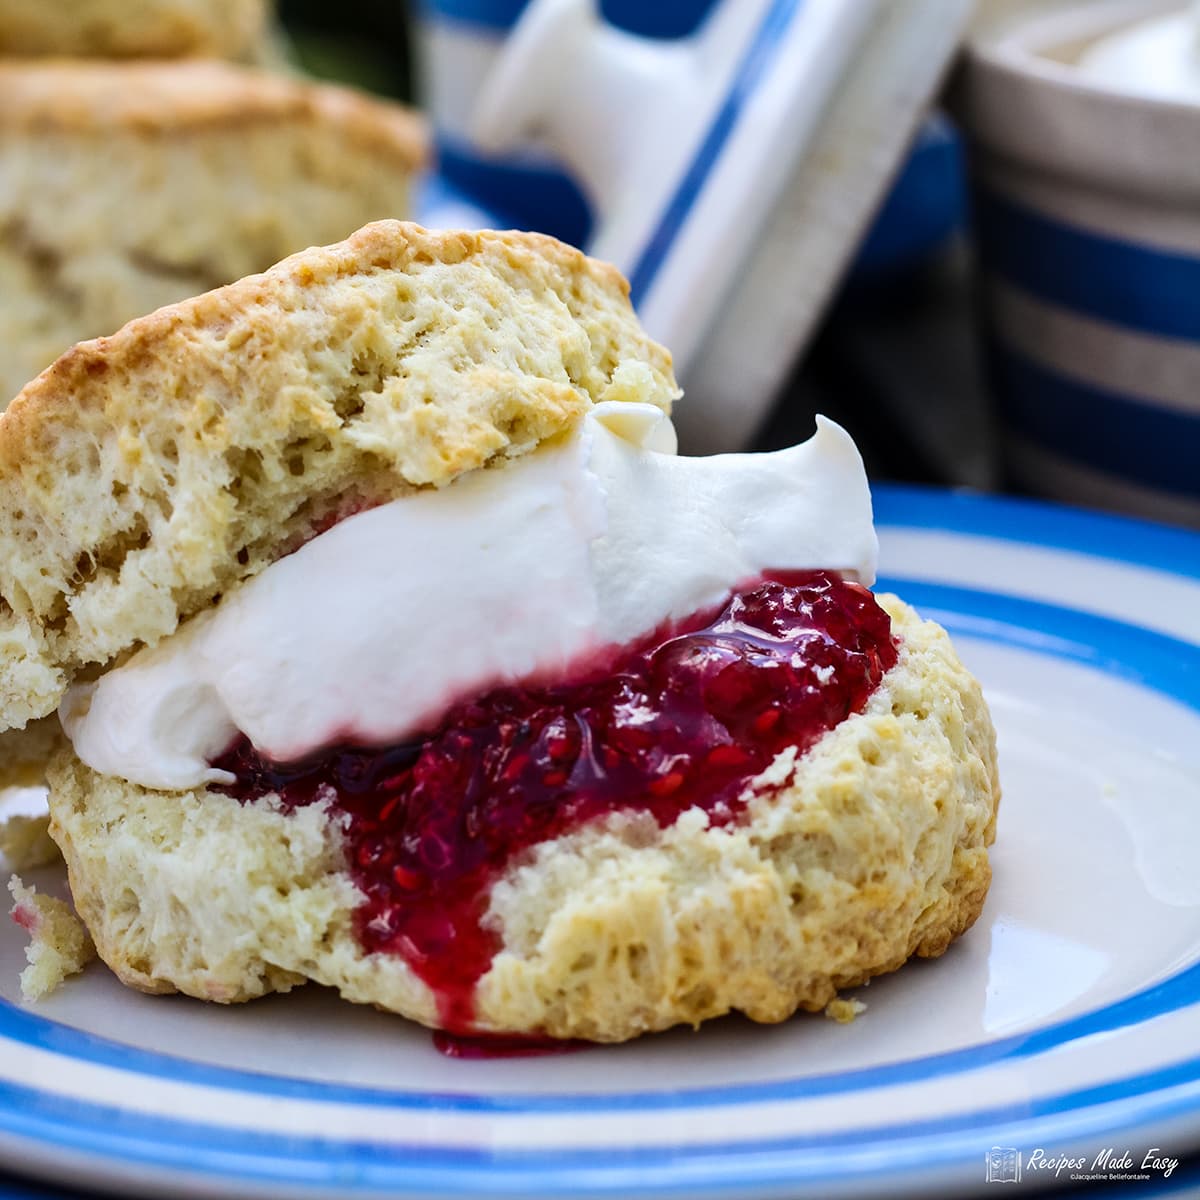 Scone split and filled with jam and cream on blue and white plate.